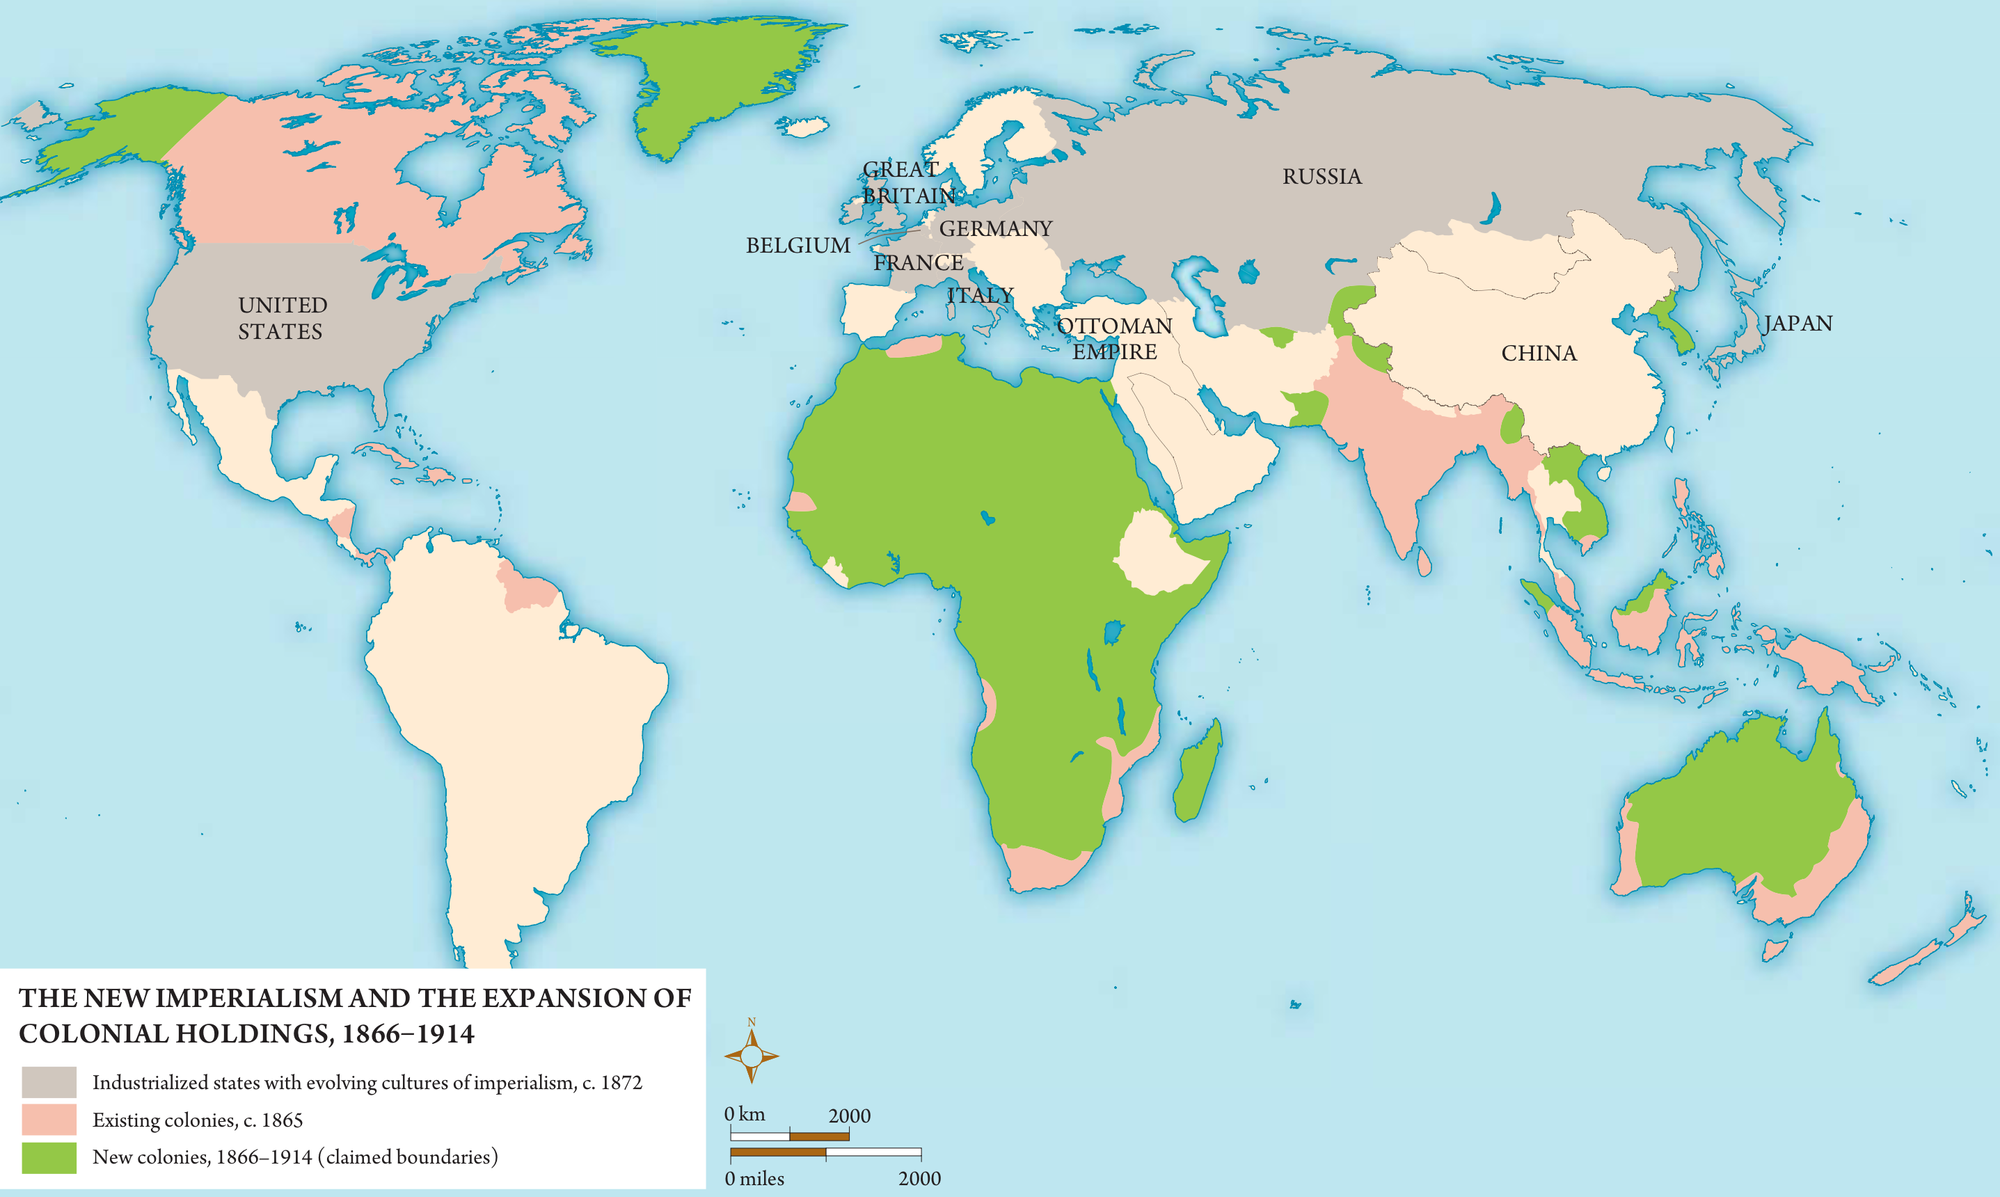 New Imperialism. Source: Empires and Colonies in the Modern World.